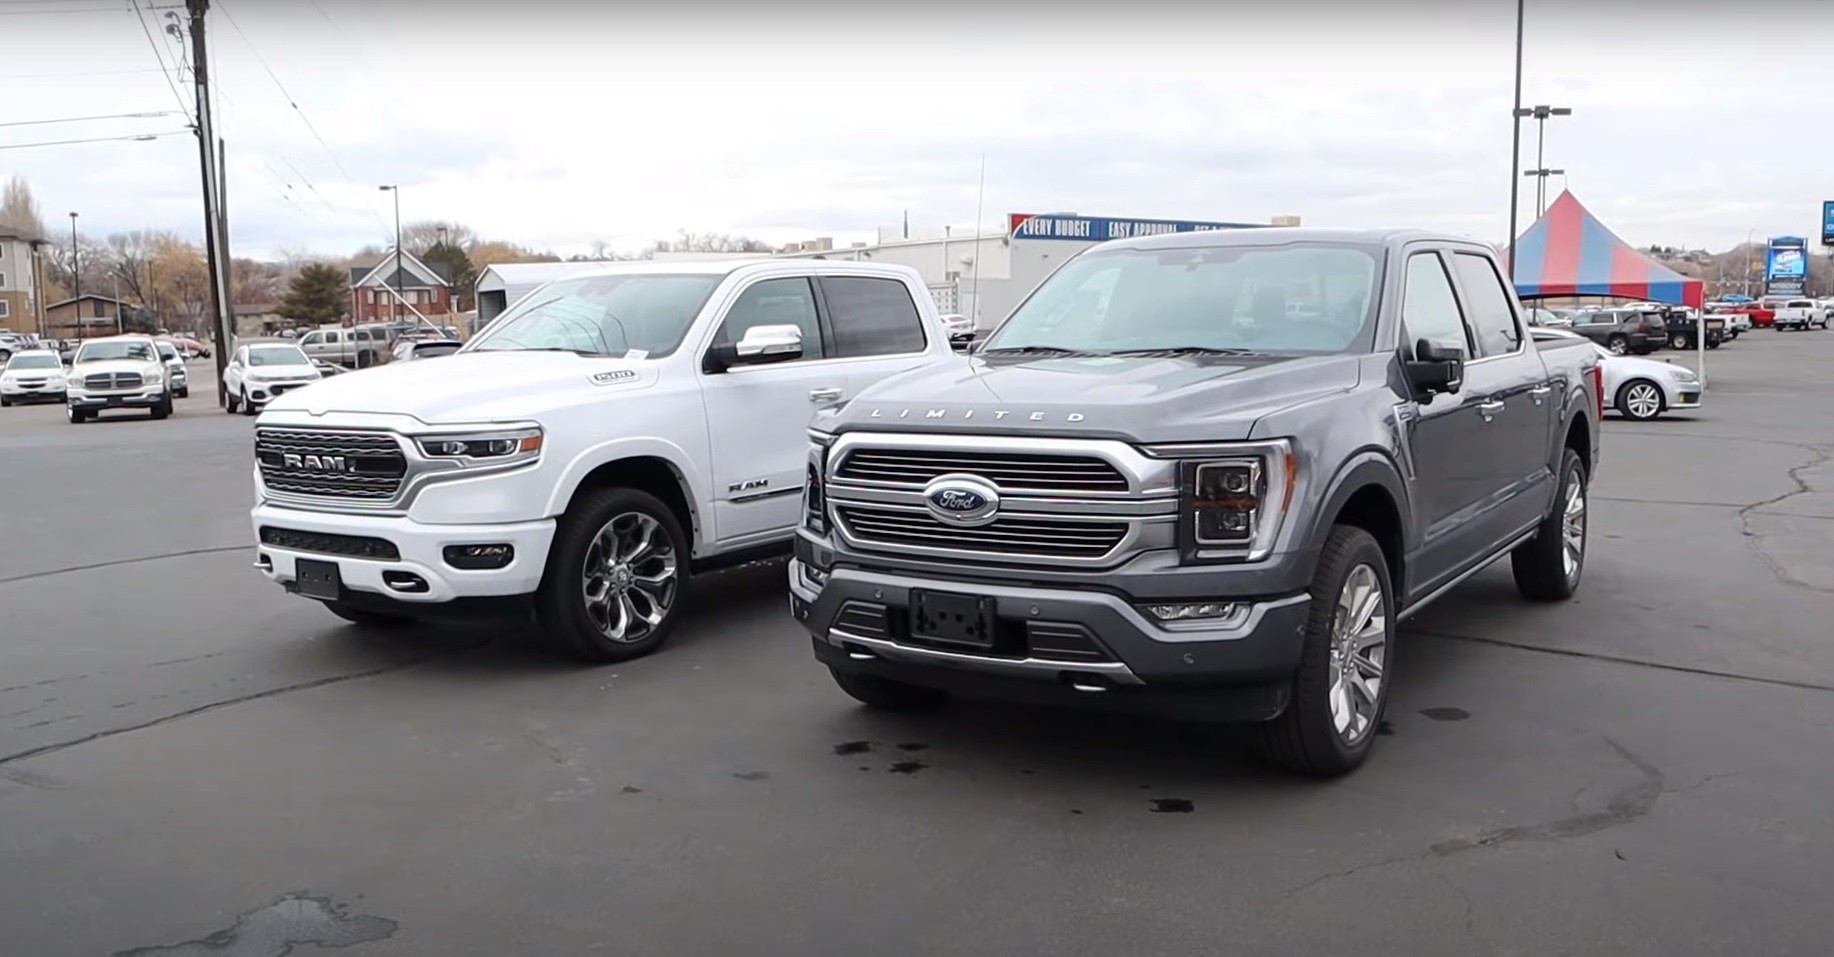 2021 RAM 1500 Limited 2021 Ford F-150 in Luxury Face-Off - autoevolution